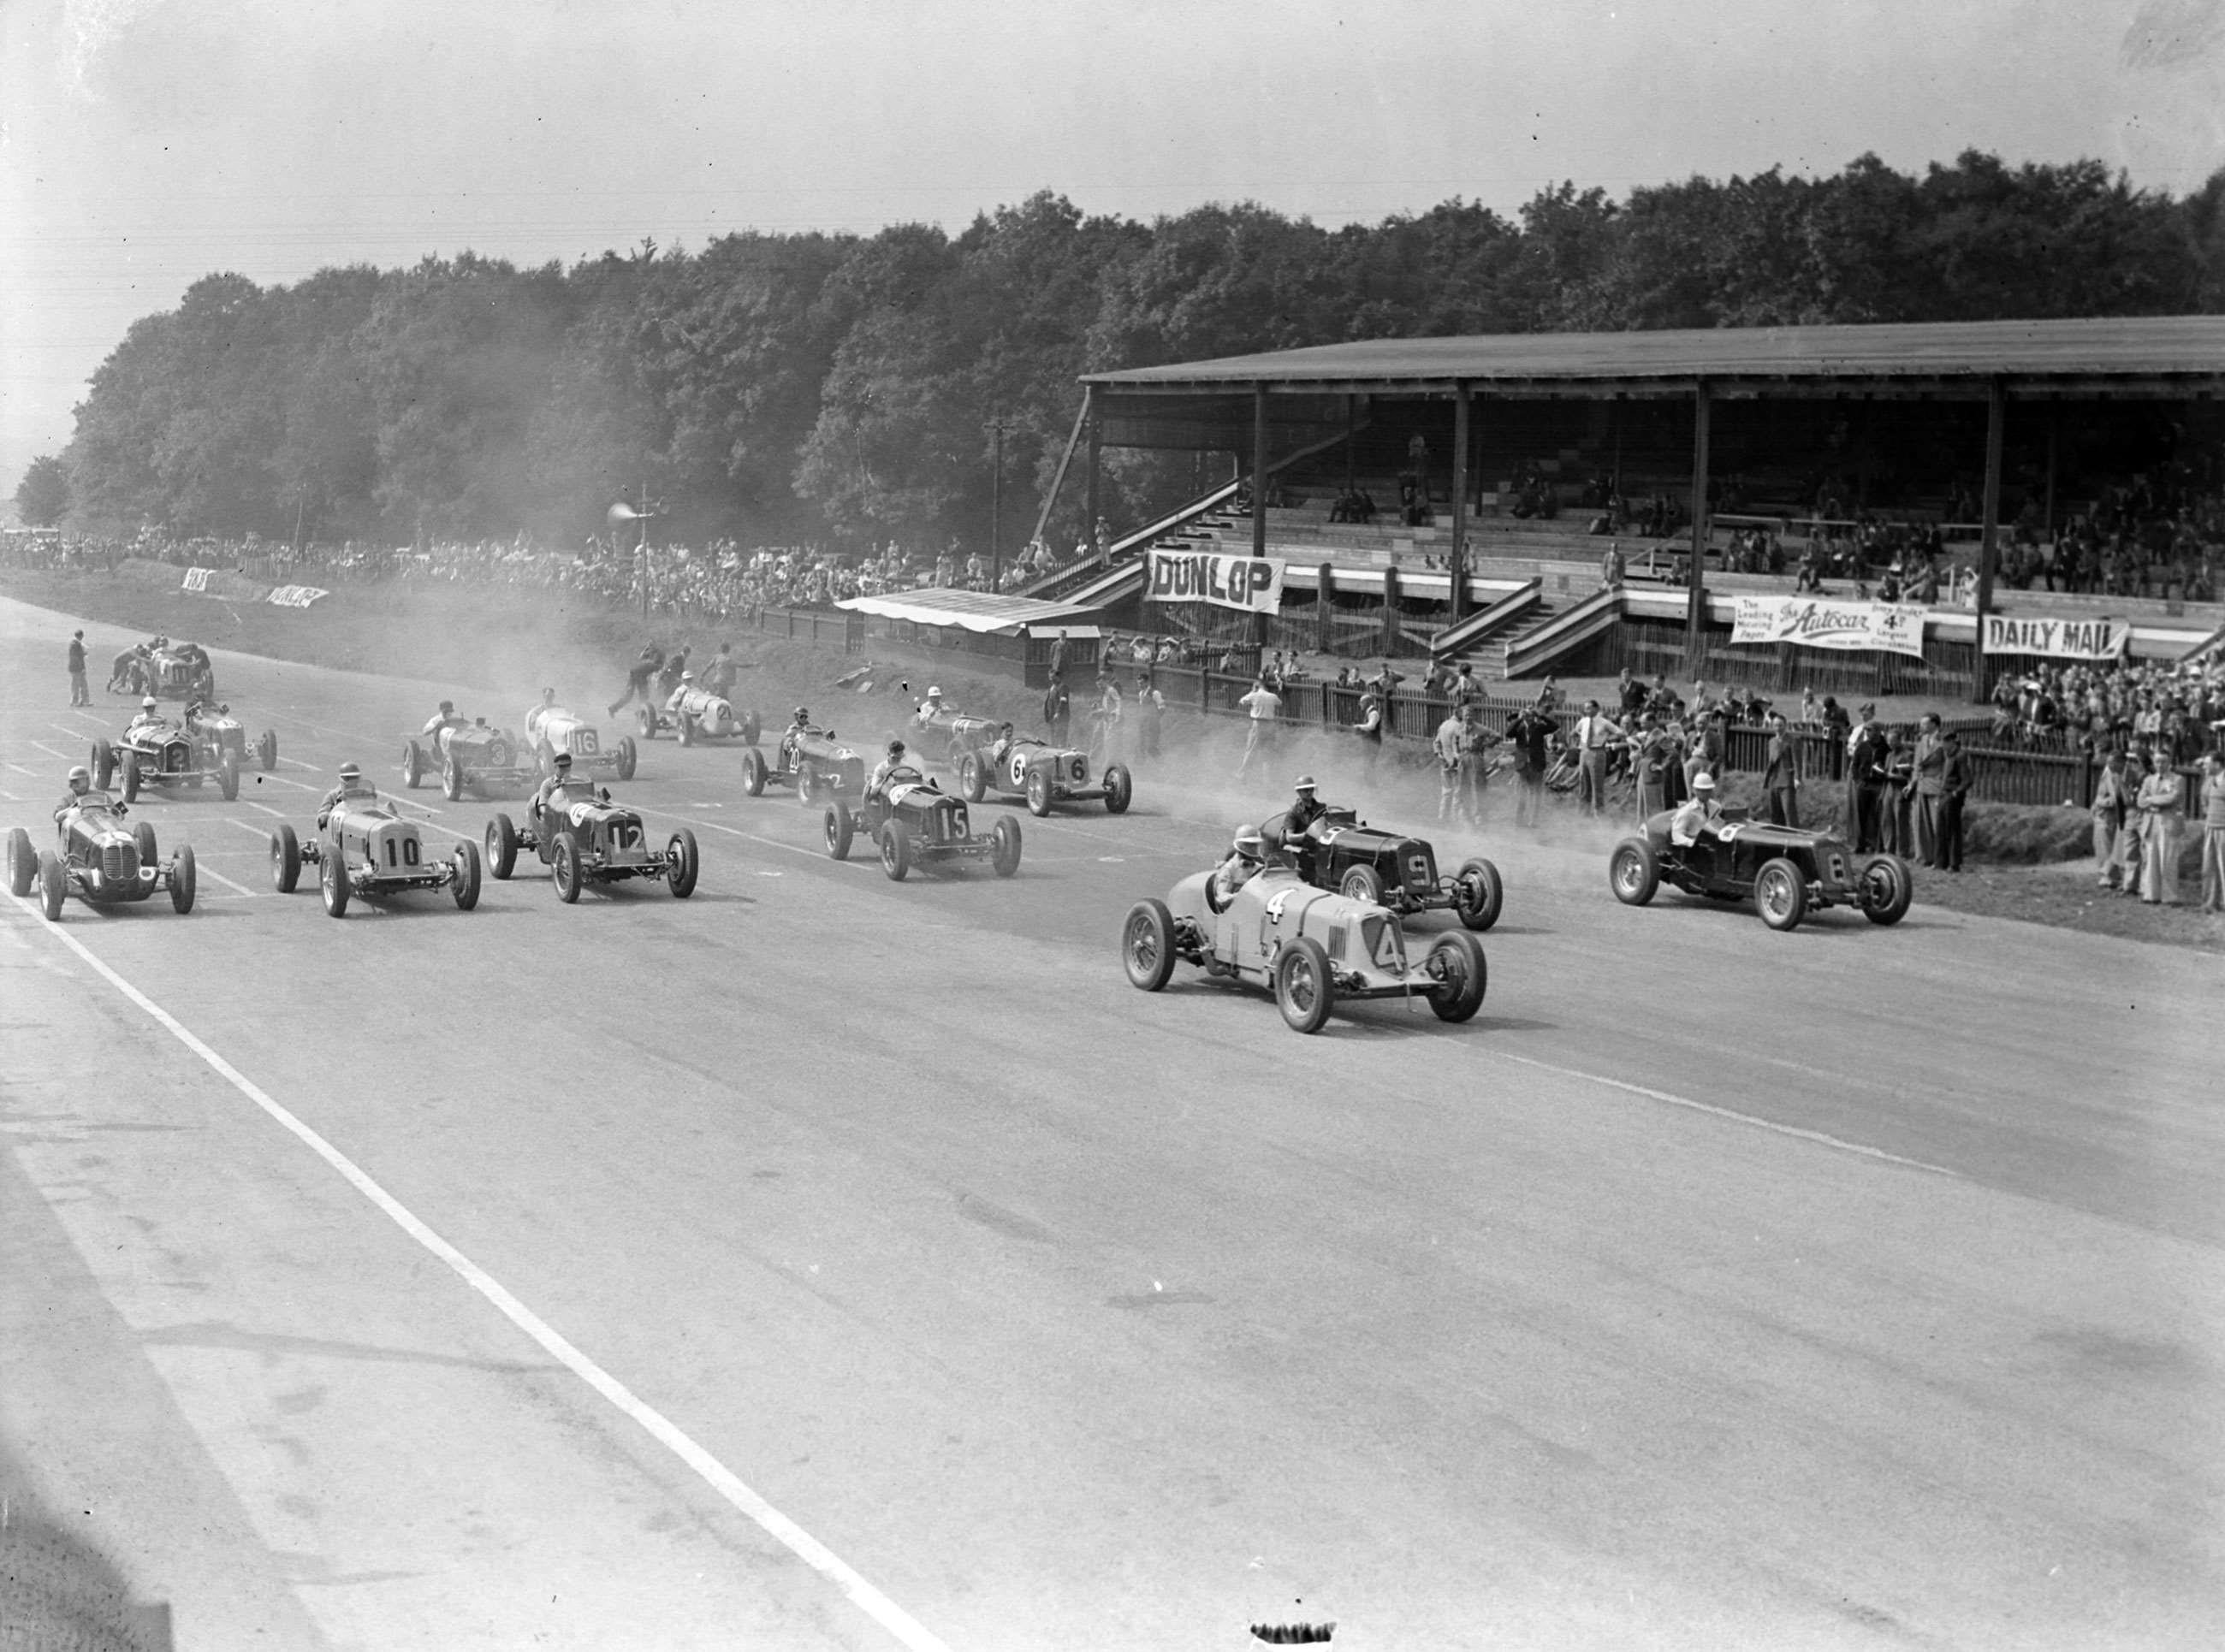 Donington Park, 1937, and the JCC 200 Miles. Prince Bira leads away from the line in his Maserati 8CM.